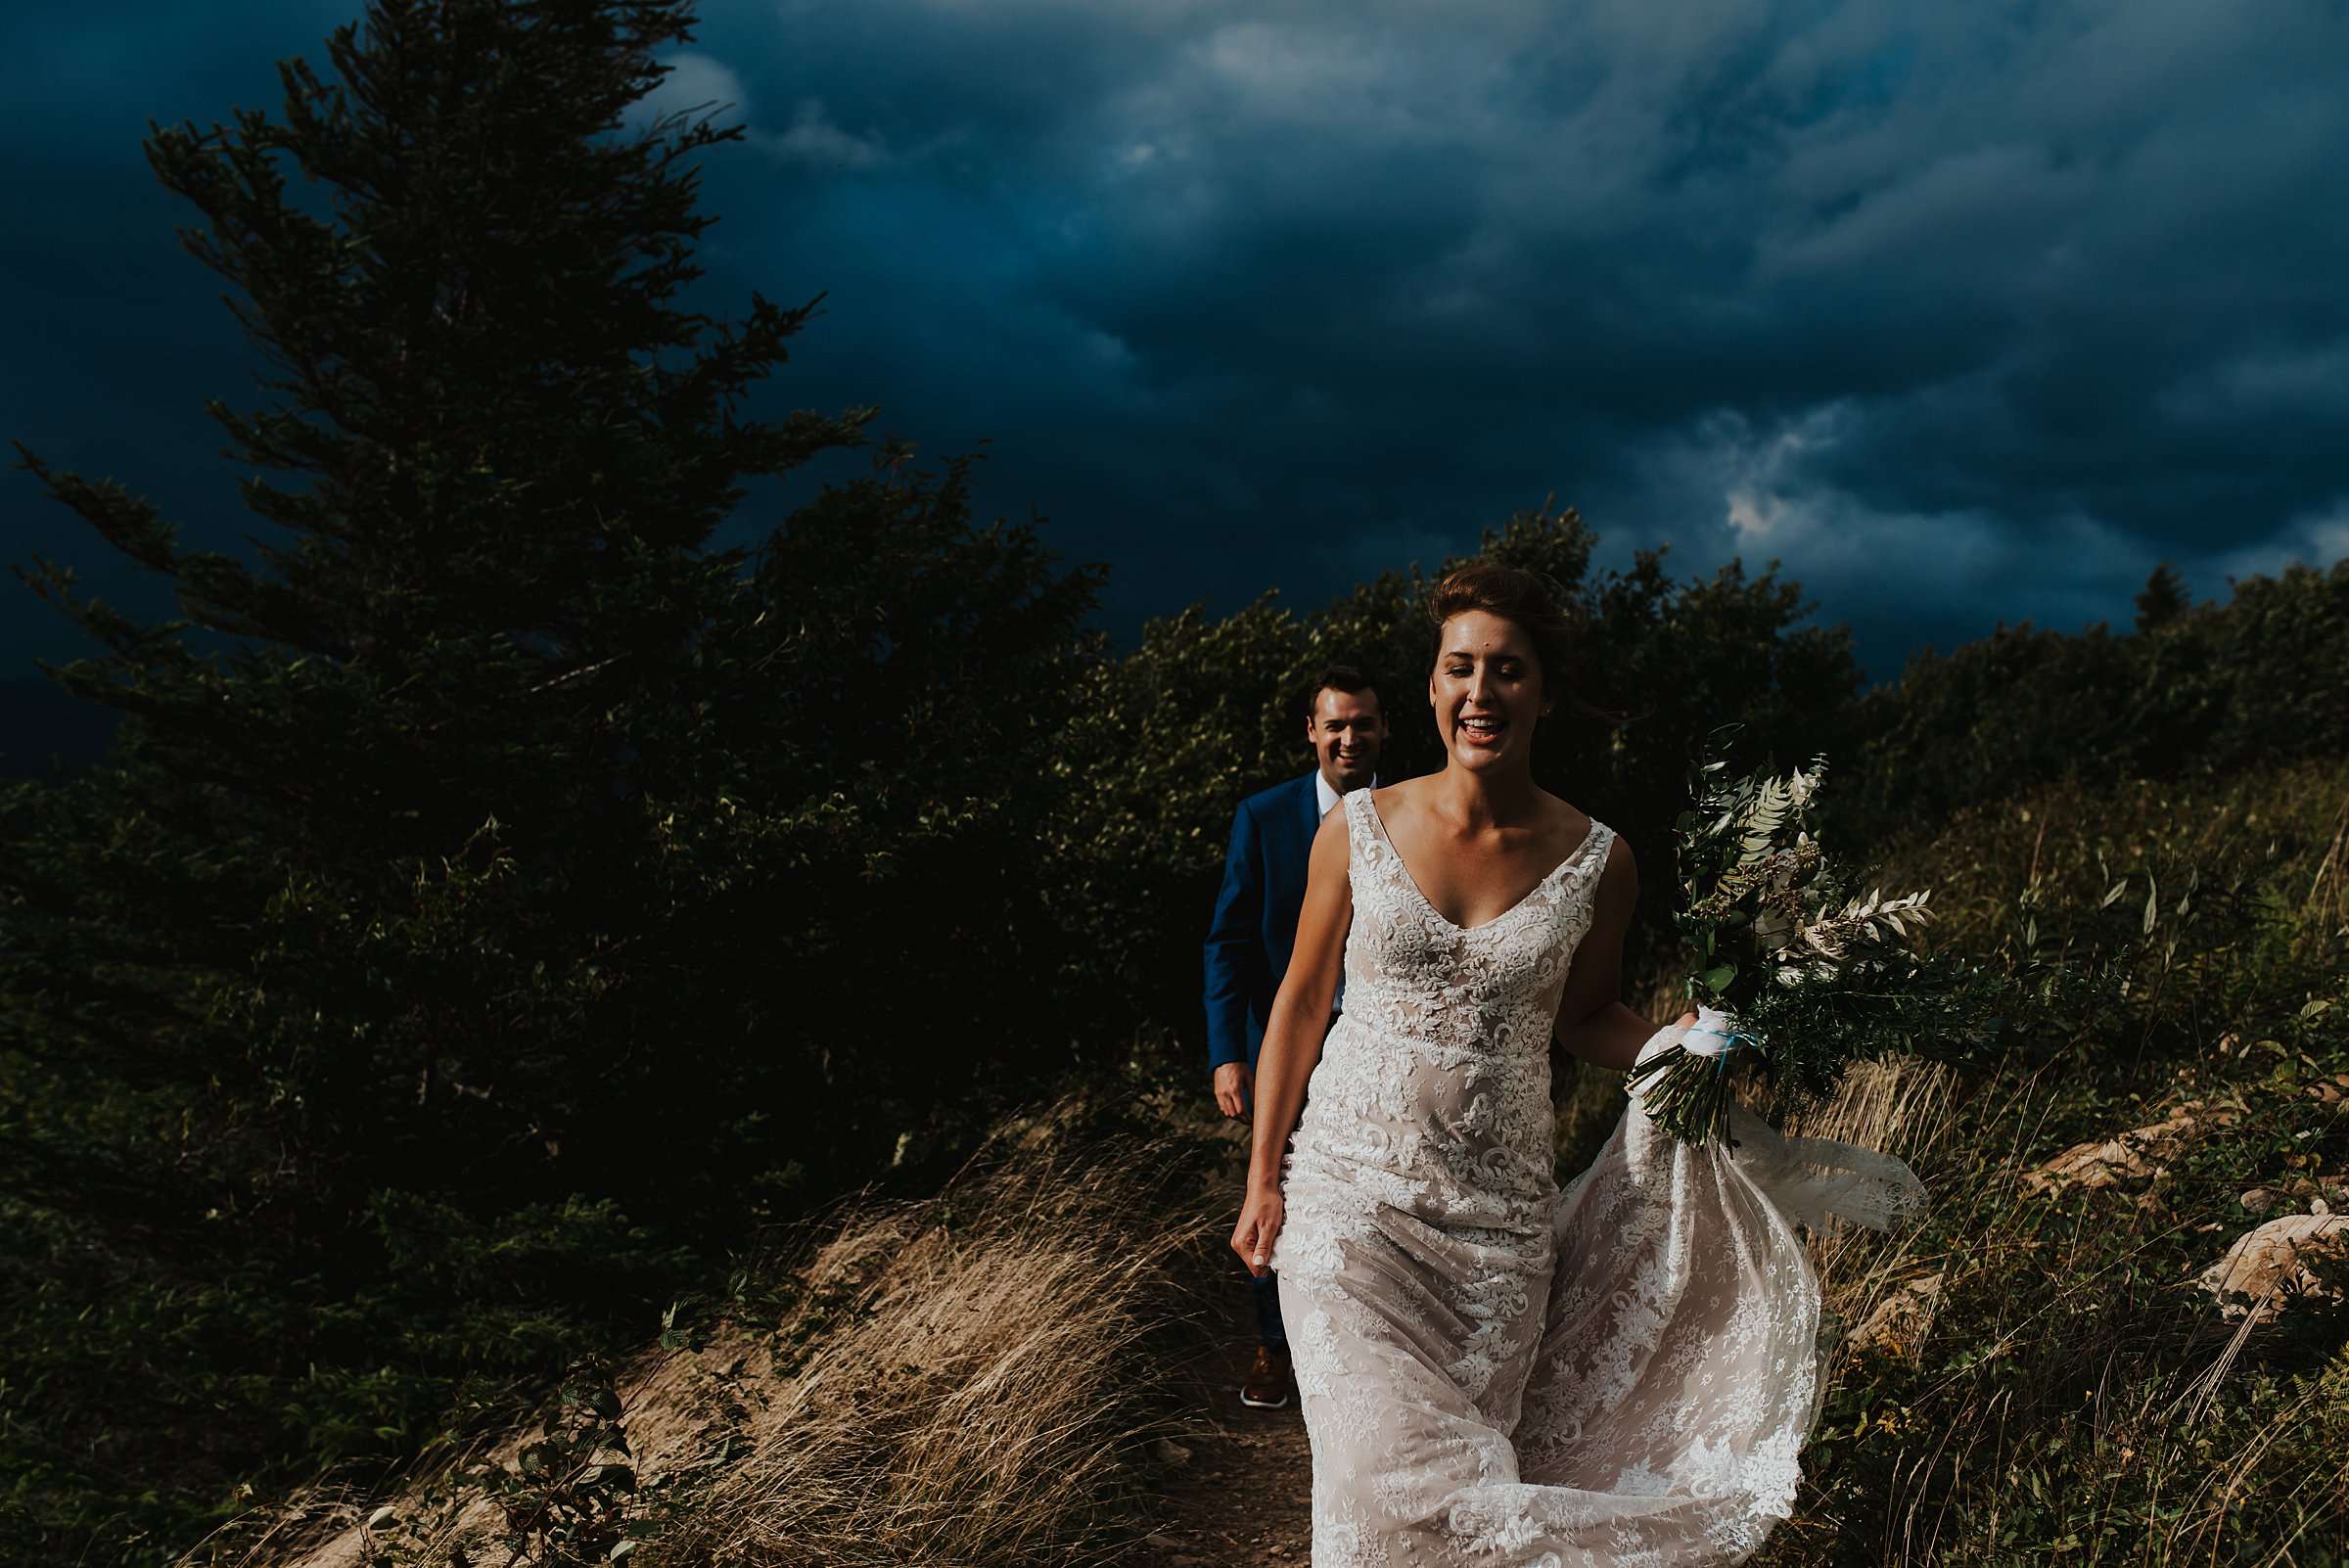 THINGS YOU MIGHT NEED FOR YOUR ADVENTURE ELOPEMENT OR INTIMATE WEDDING